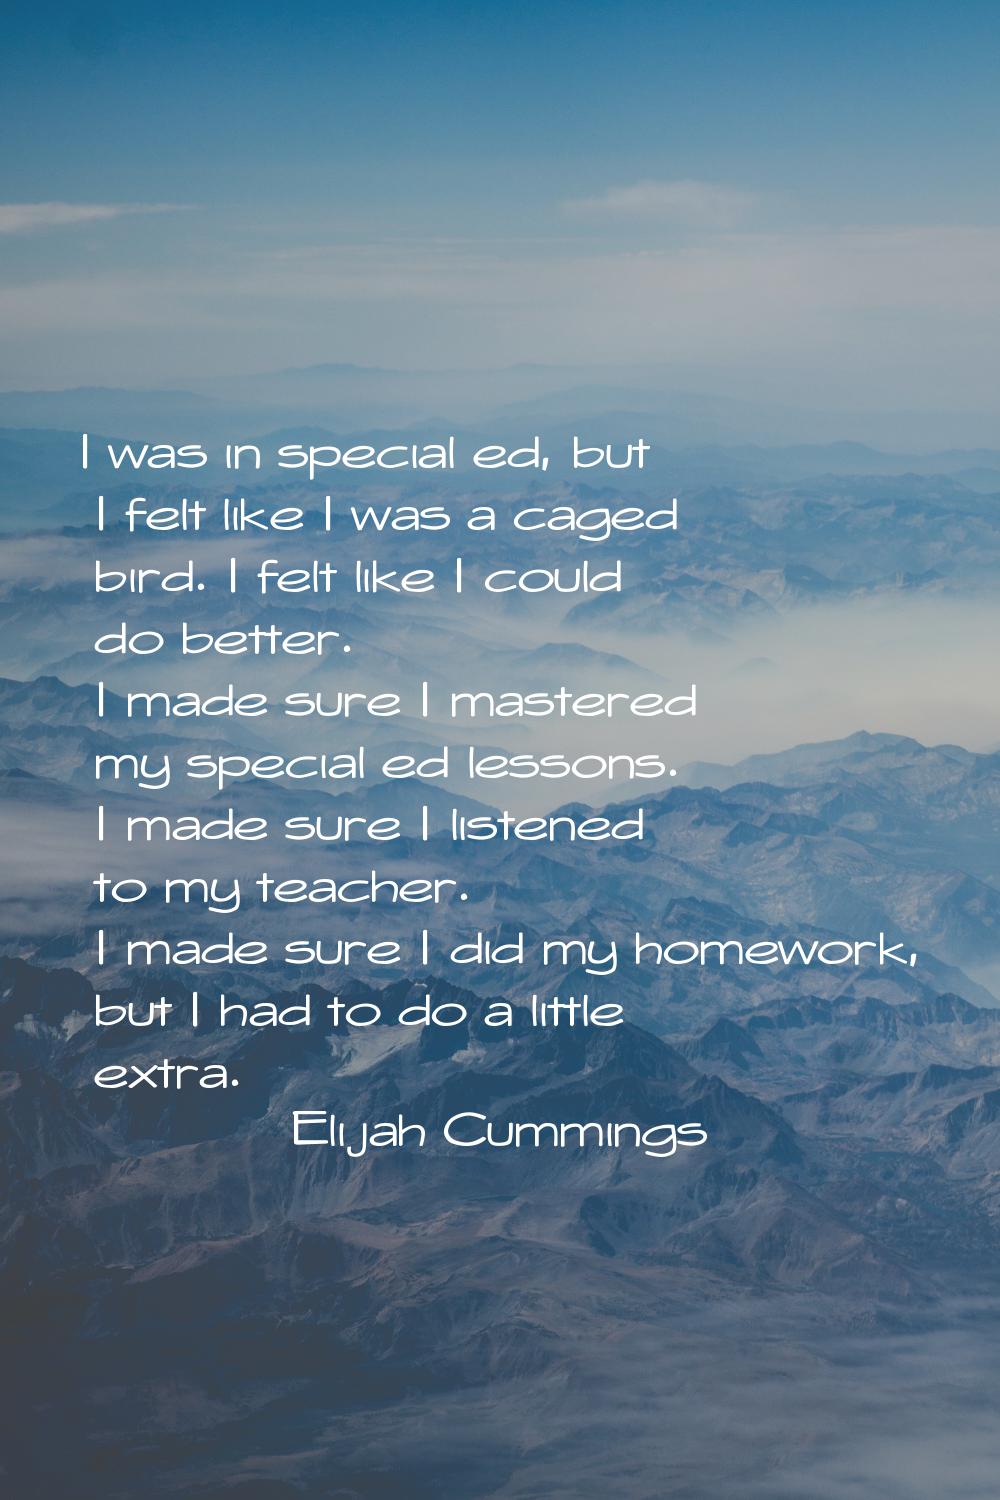 I was in special ed, but I felt like I was a caged bird. I felt like I could do better. I made sure